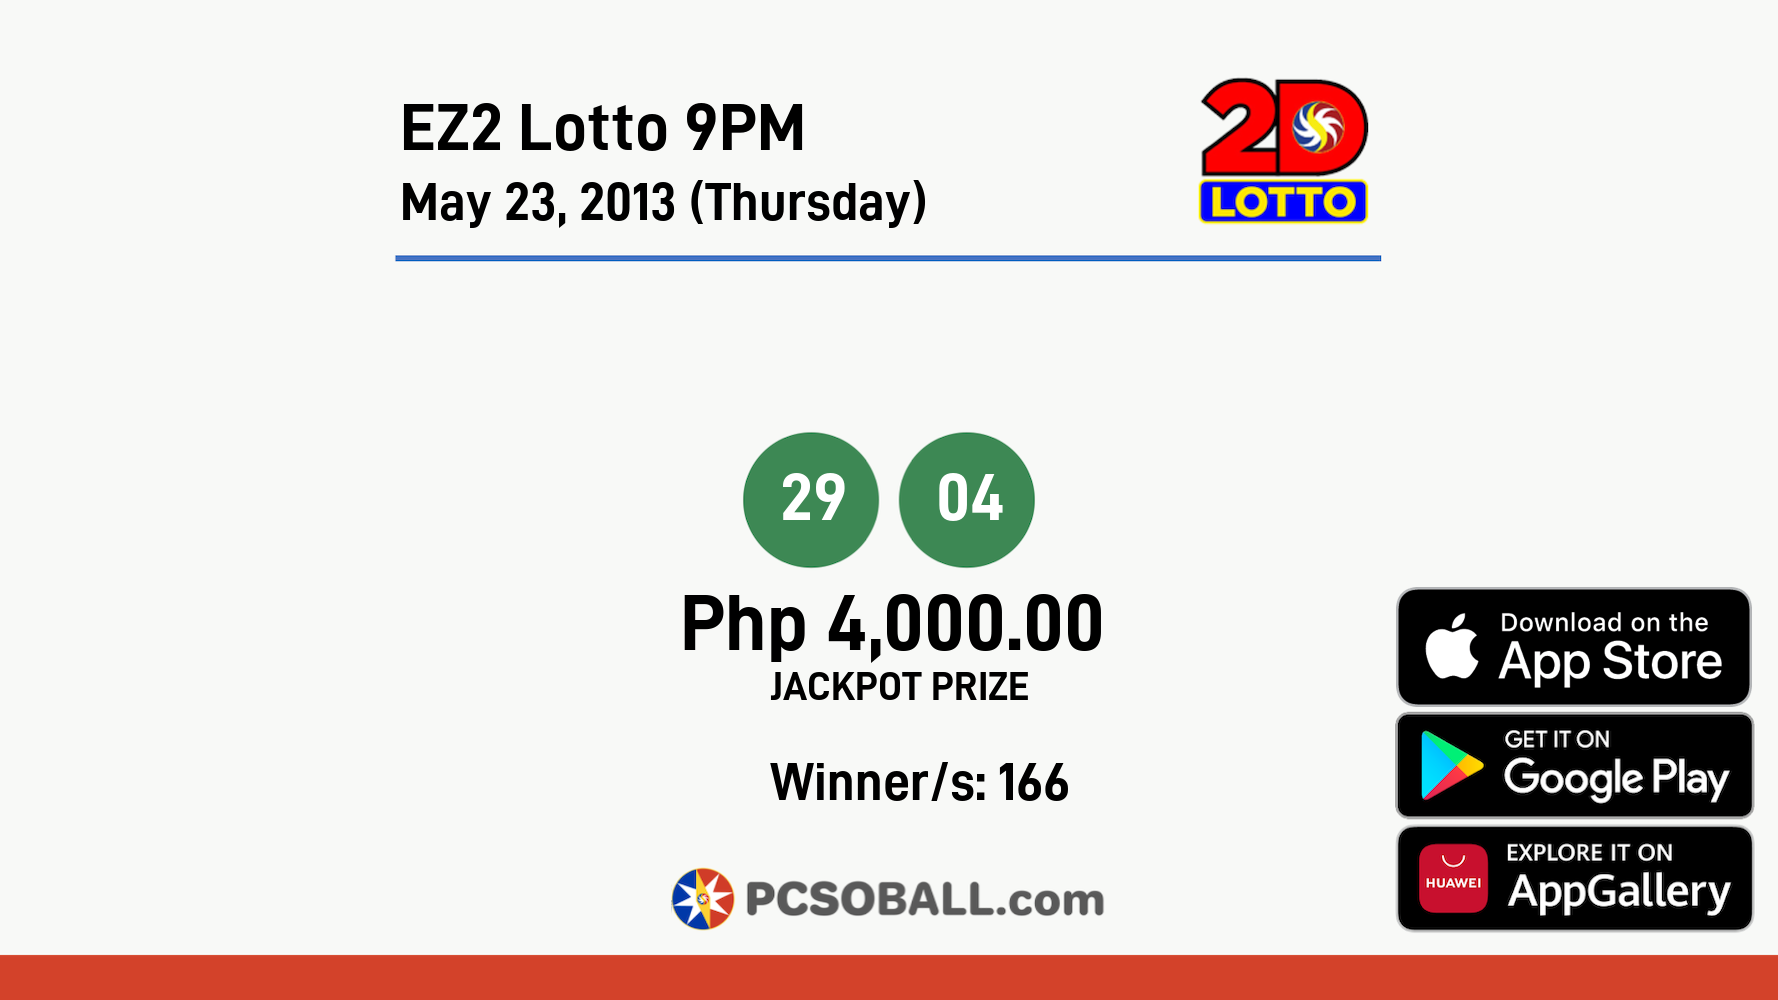 EZ2 Lotto 9PM May 23, 2013 (Thursday) Result